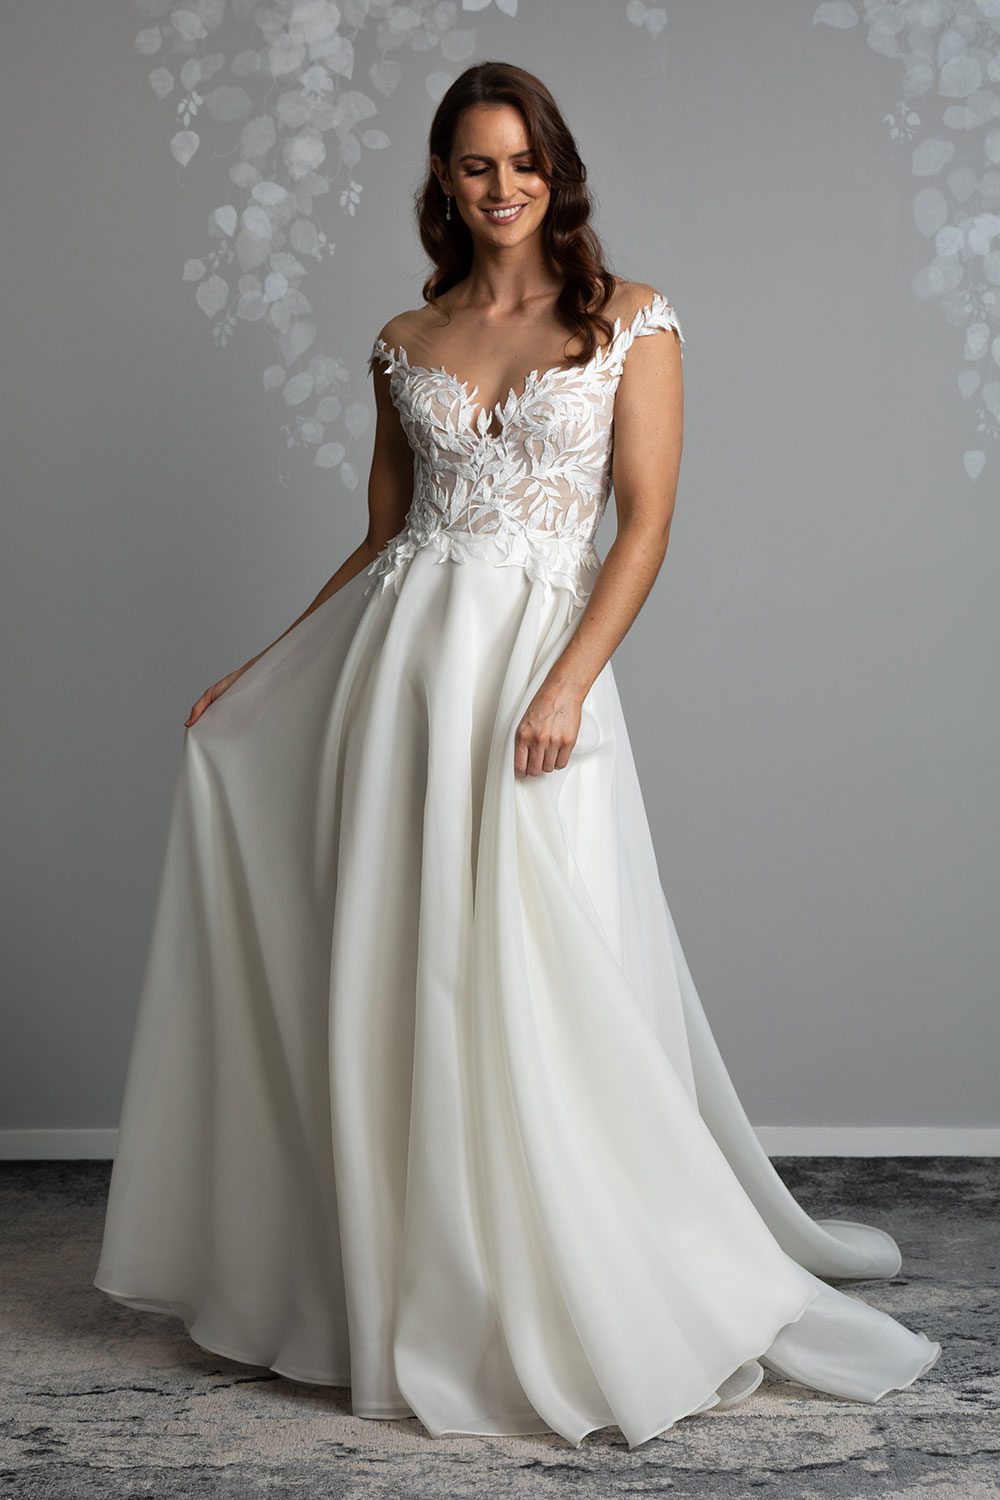 Ariana Wedding gown from Vinka Design - This gorgeous gown features delicate leaf lace hand-appliqued throughout the semi-sheer, structured bodice and up over the shoulder and skirt made of dreamy satin organza layers. Model shows off the light translucent effect of the skirt